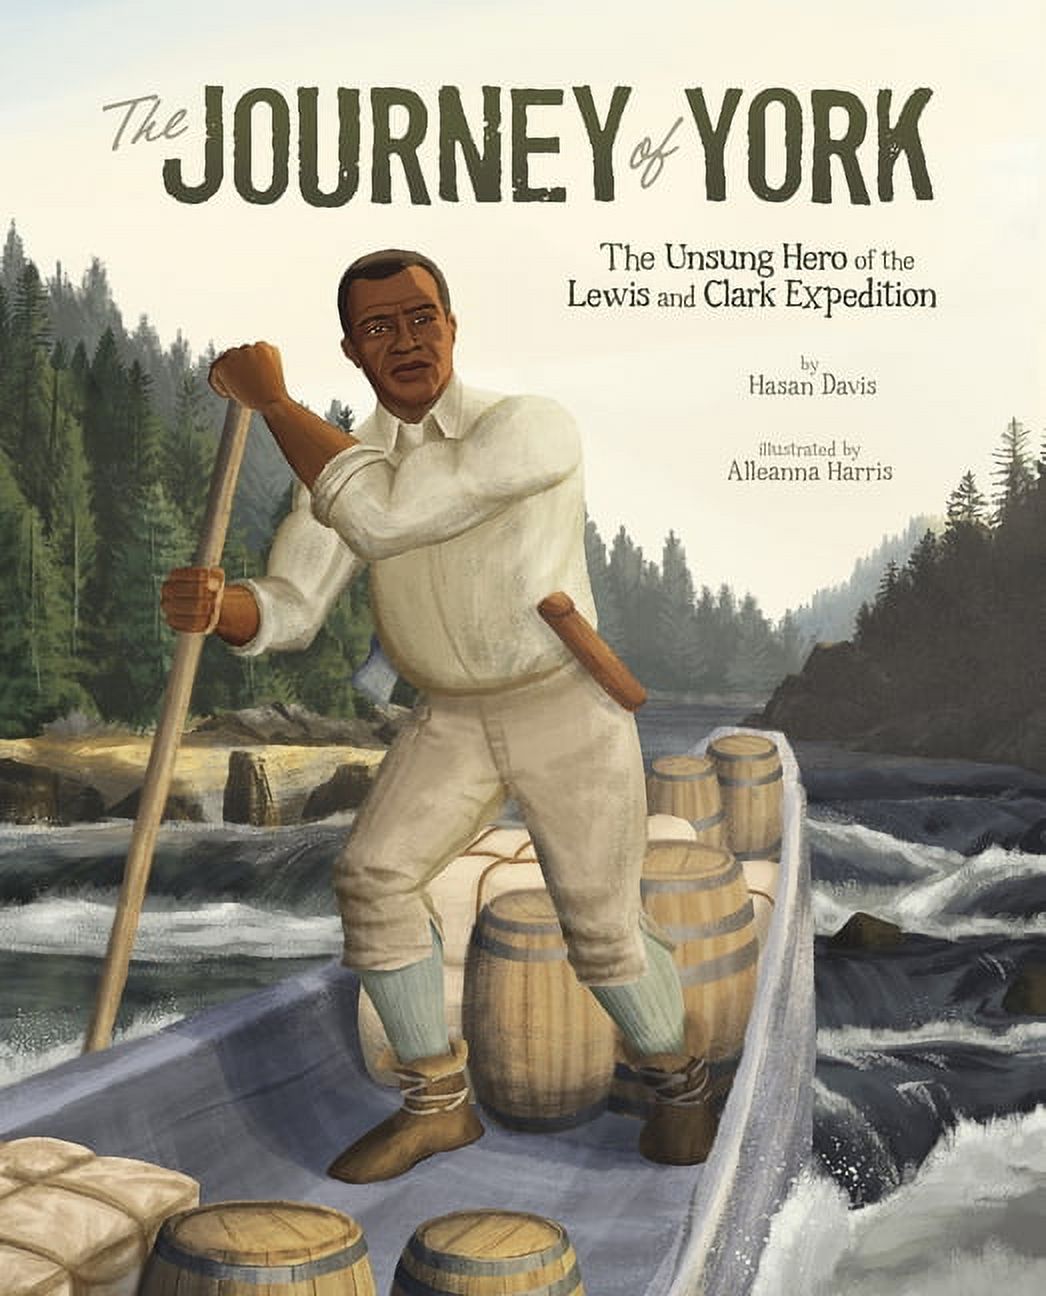 The Journey of York The Unsung Hero of the Lewis and Clark Expedition  (Paperback)